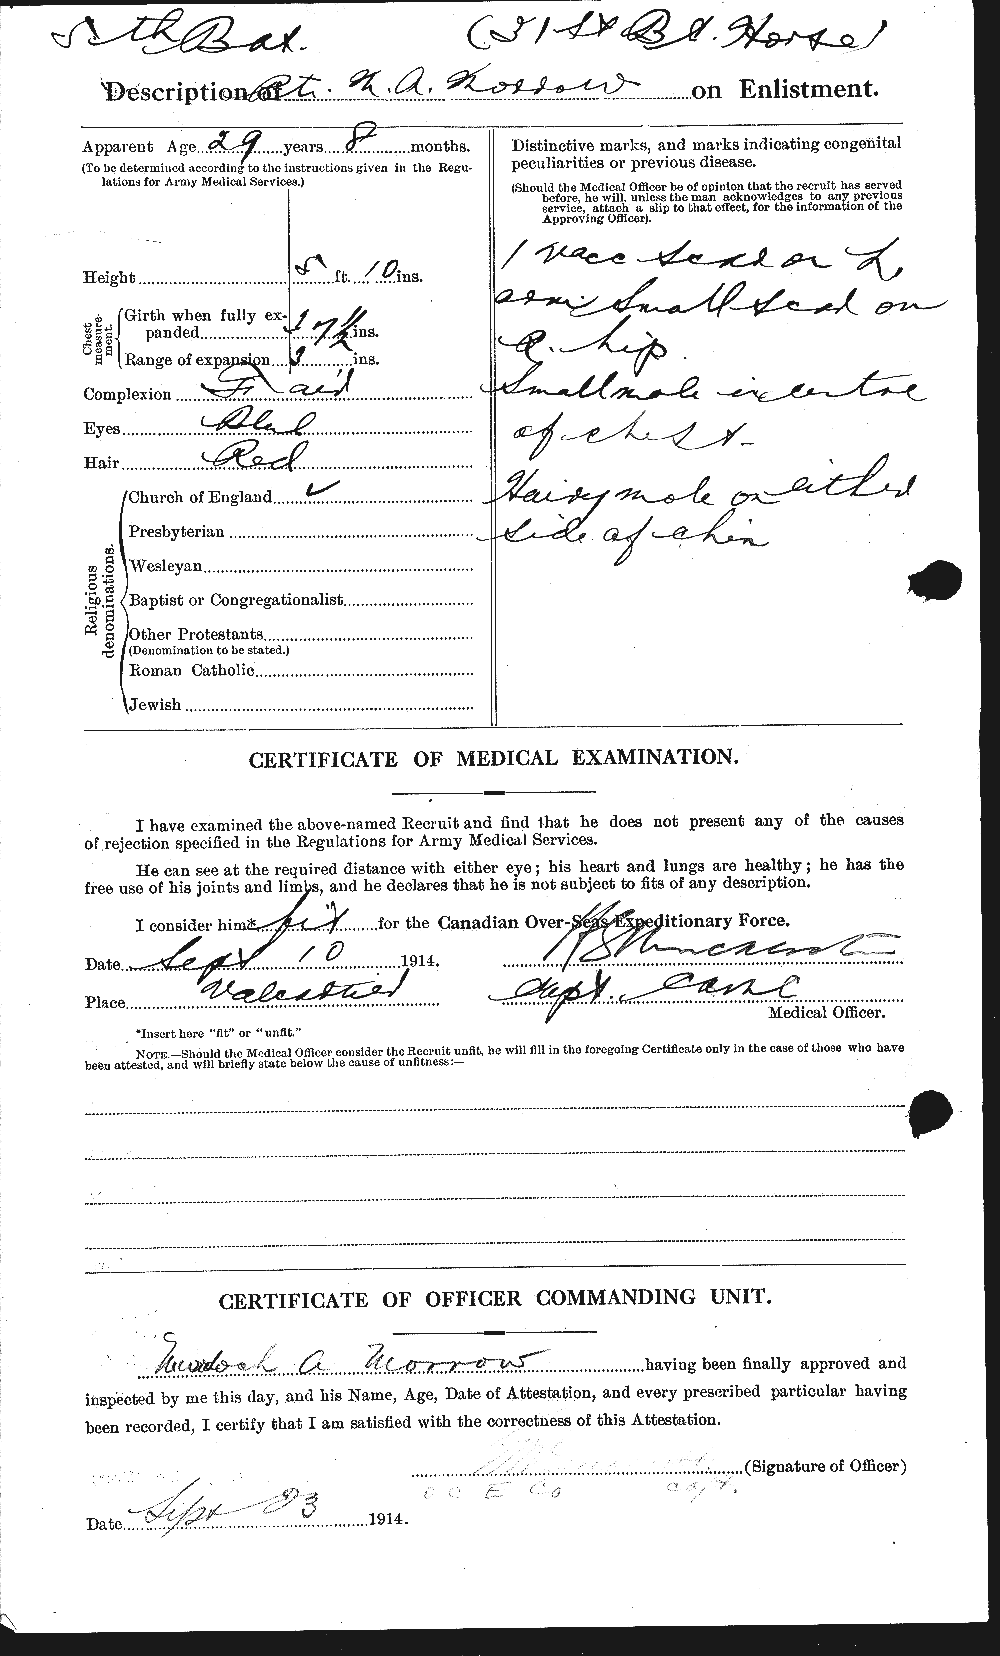 Personnel Records of the First World War - CEF 504295b